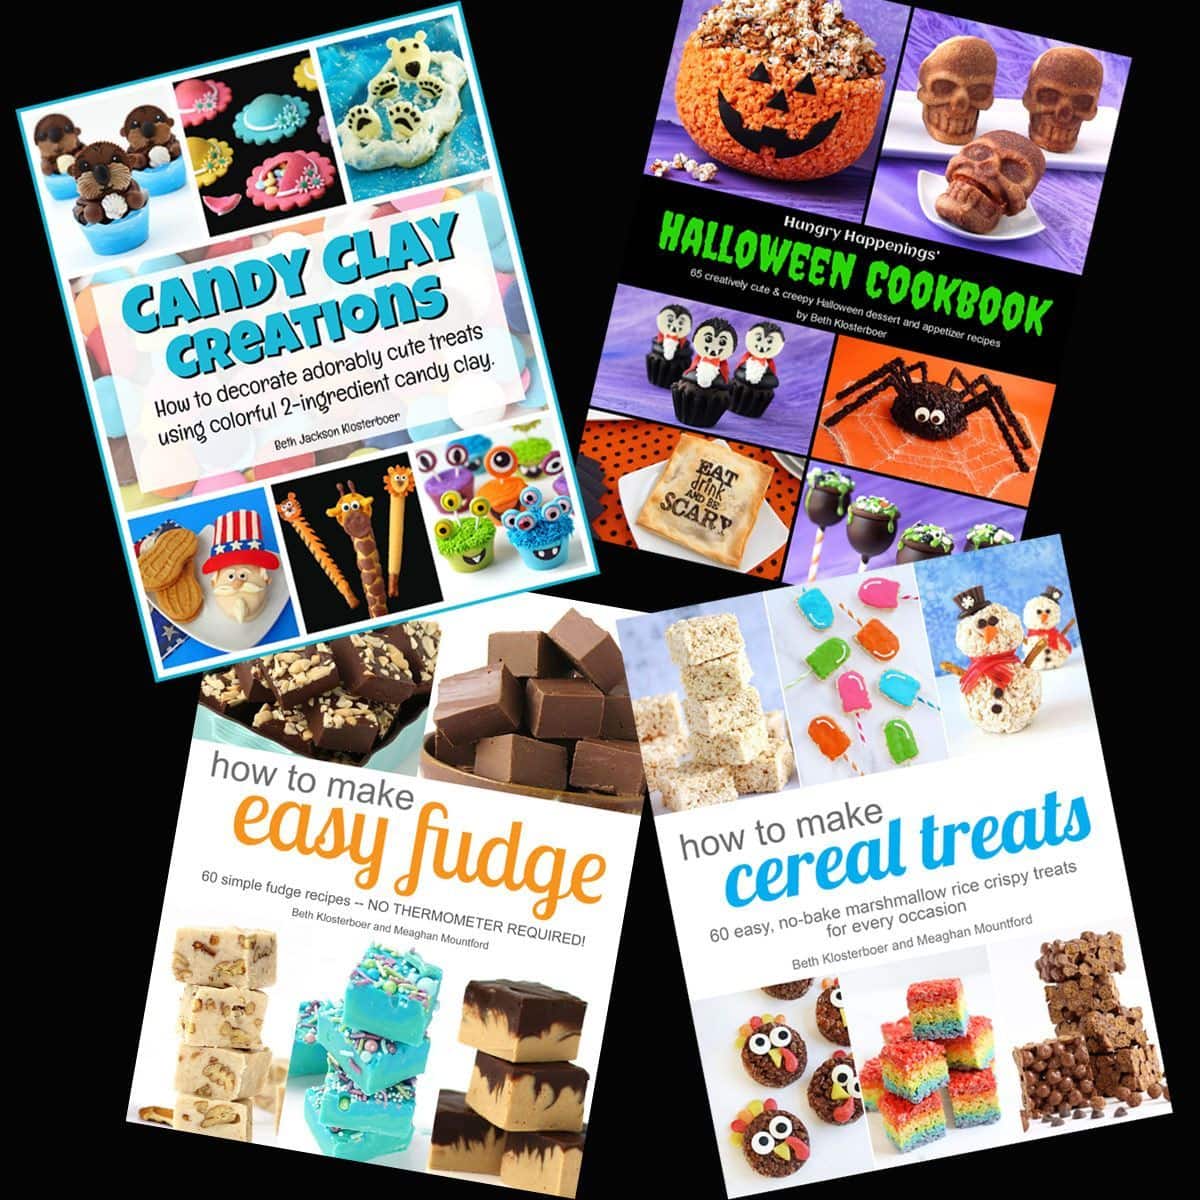 Beth Jackson Klosterboer's cookbooks, Candy Clay Creations, Hungry Happenings Halloween Cookbook, How To Make Easy Fudge, and How To Make Cereal Treats